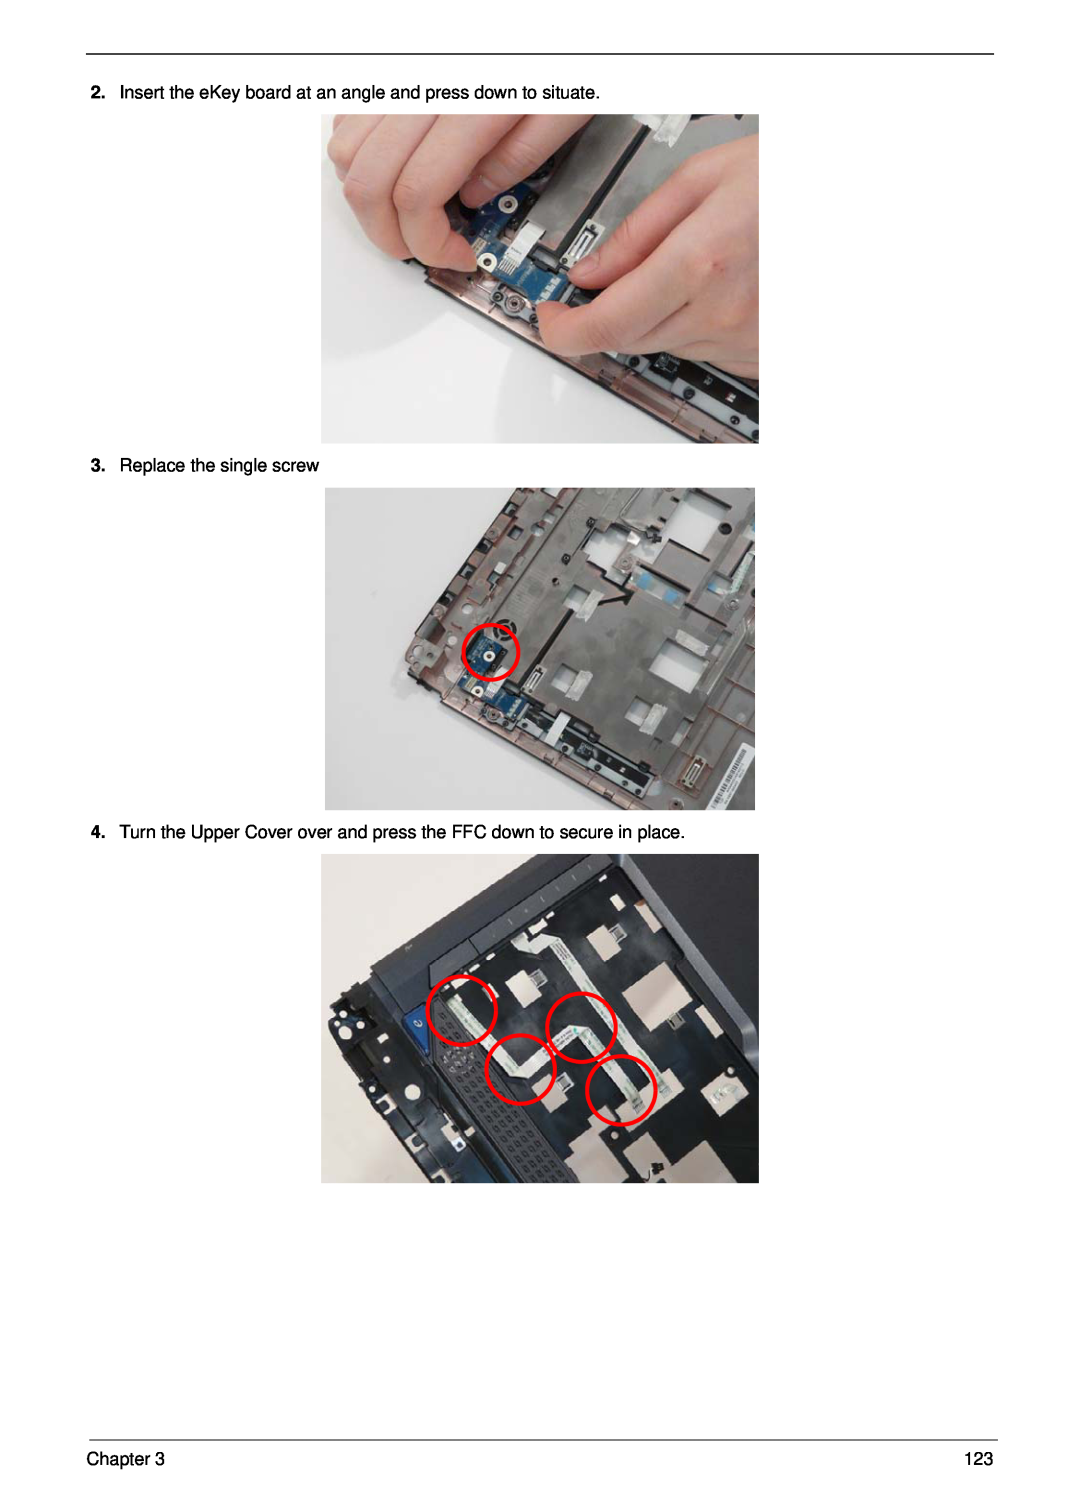 Acer 5530G manual Insert the eKey board at an angle and press down to situate, Replace the single screw, Chapter 